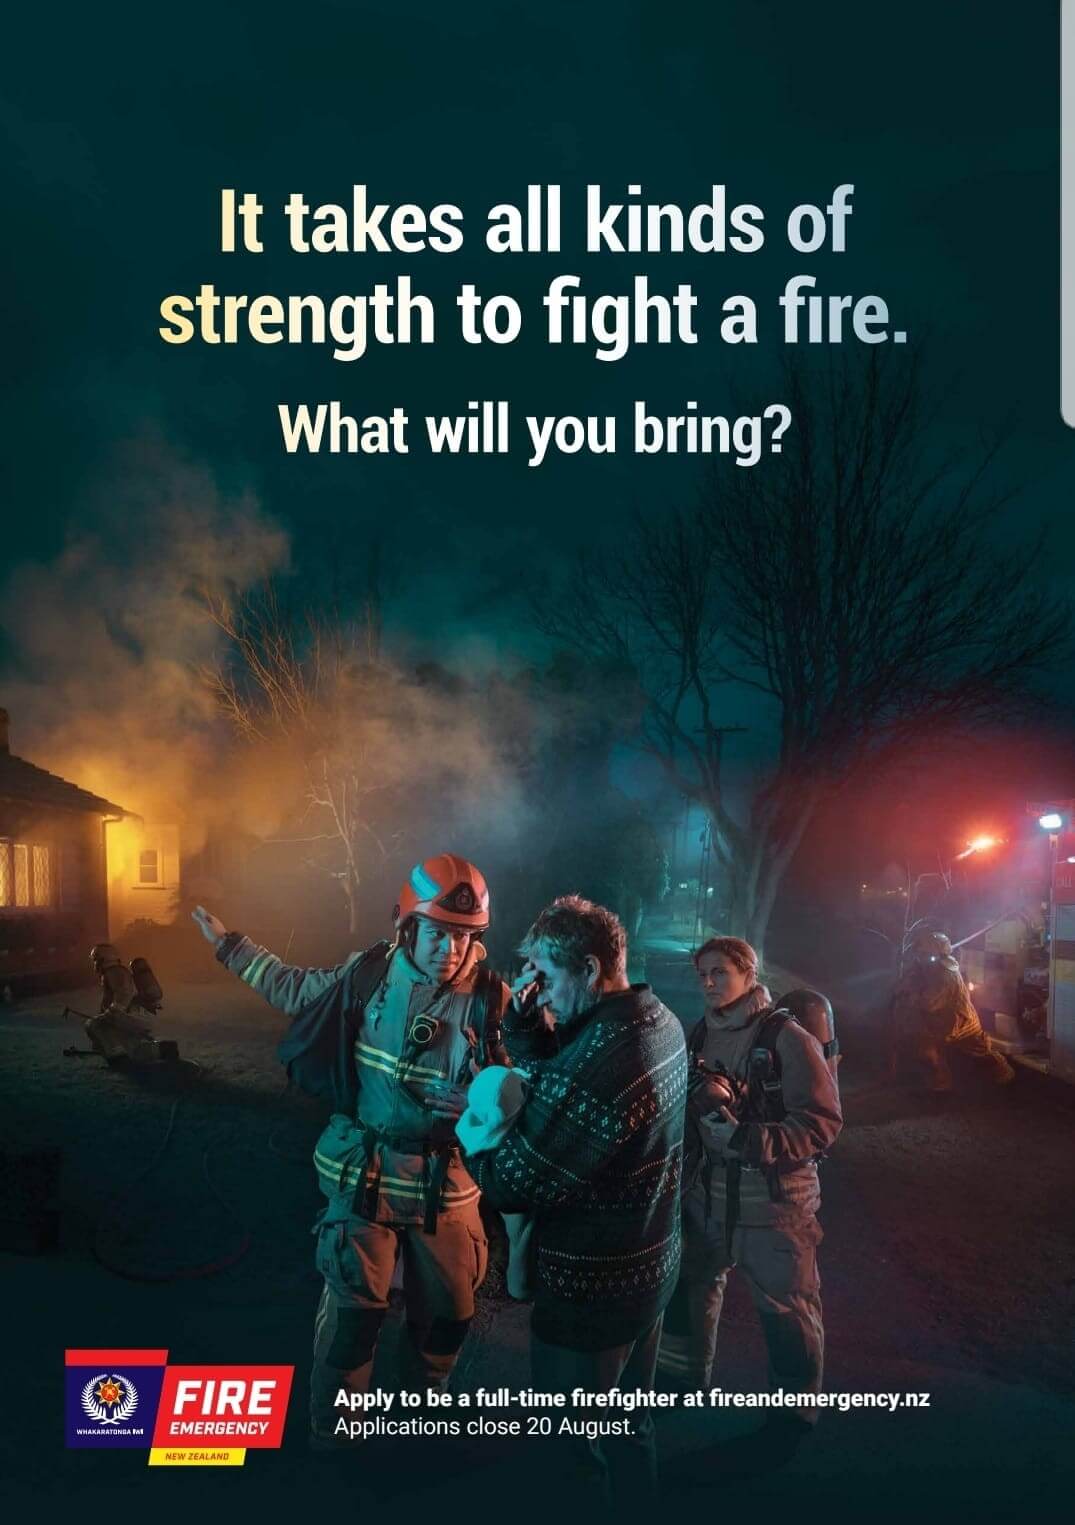 Apply to be a full-time firefighter at fireandemergency.nz